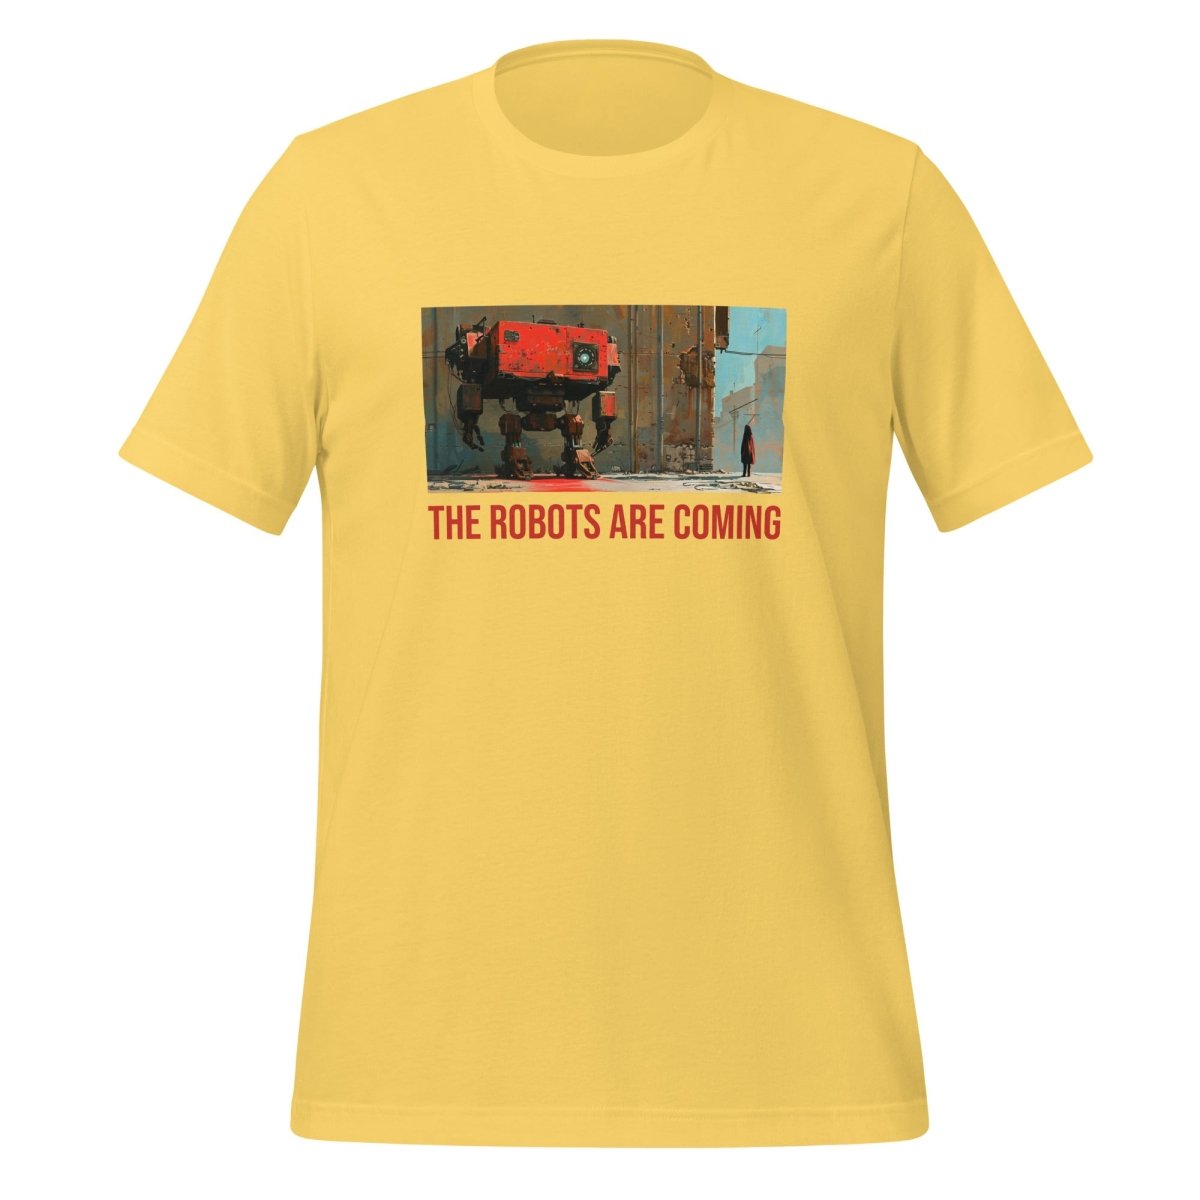 Illustrated The Robots Are Coming T - Shirt (unisex) - Yellow - AI Store